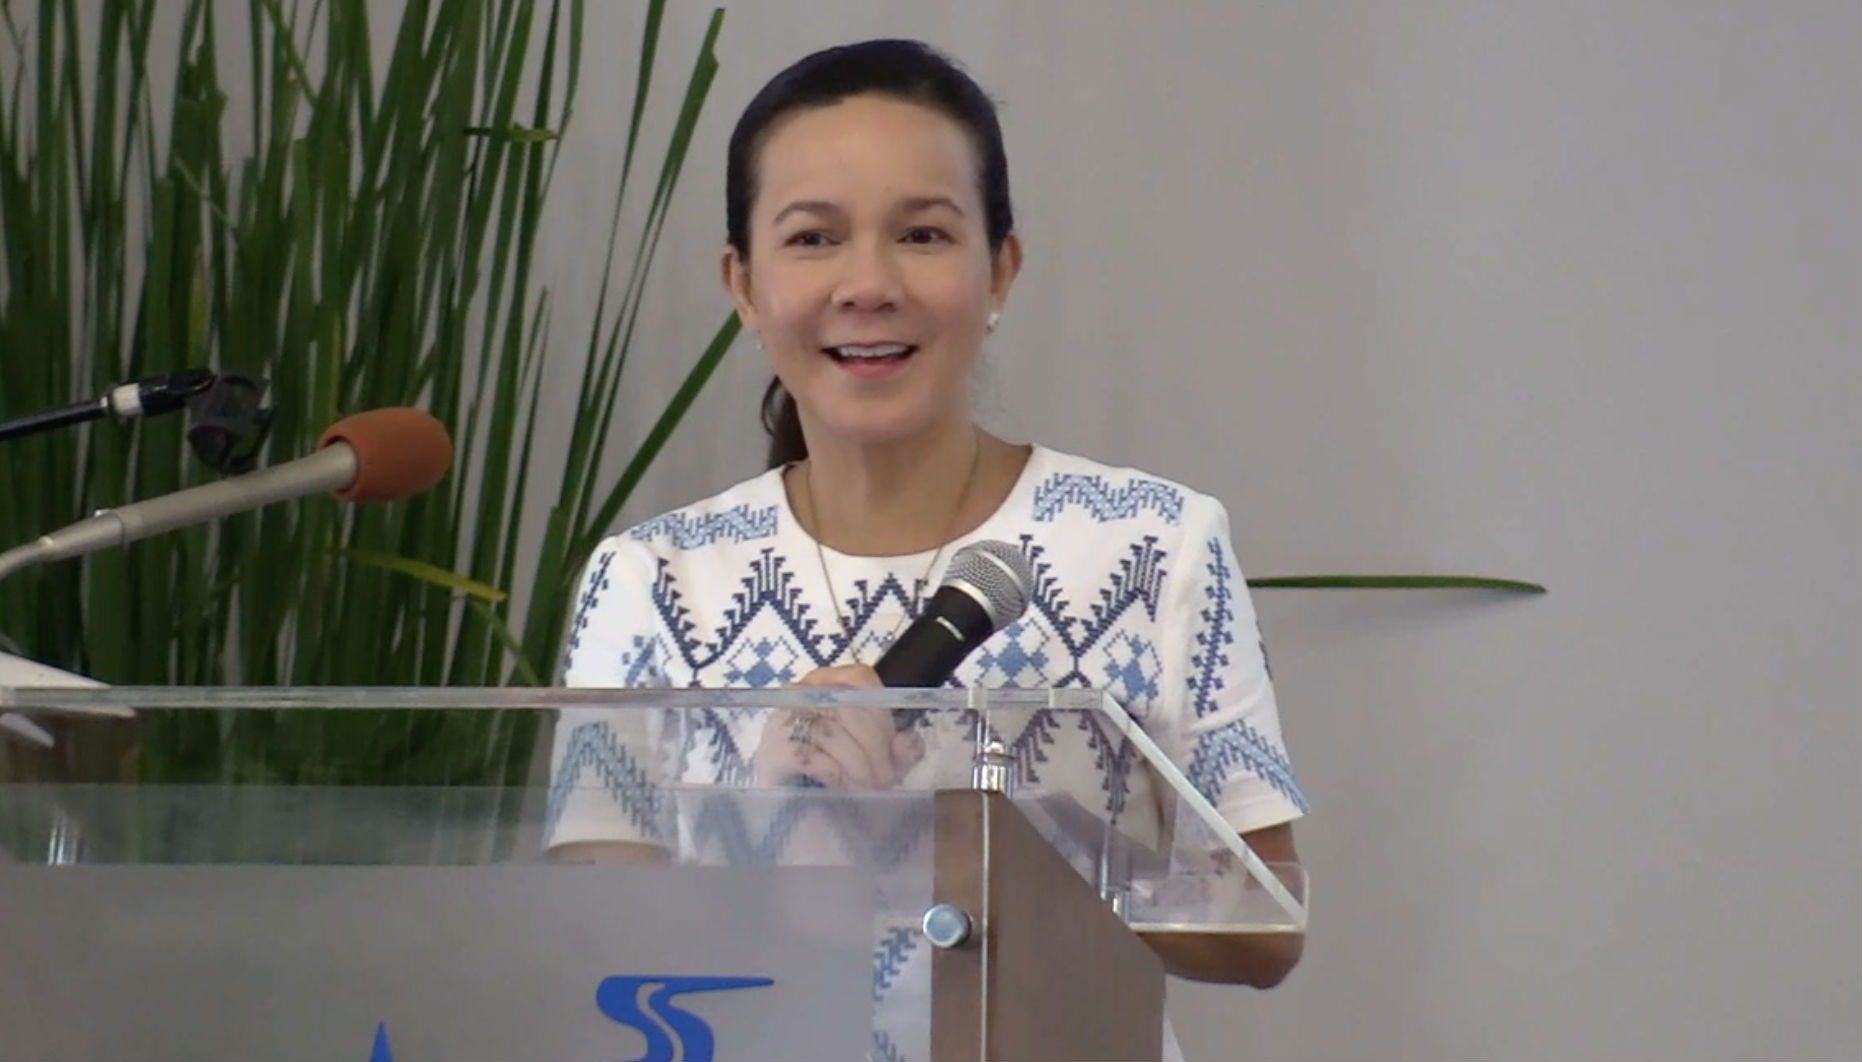 Water catchment areas, cisterns to help LGUs during dry season – Poe